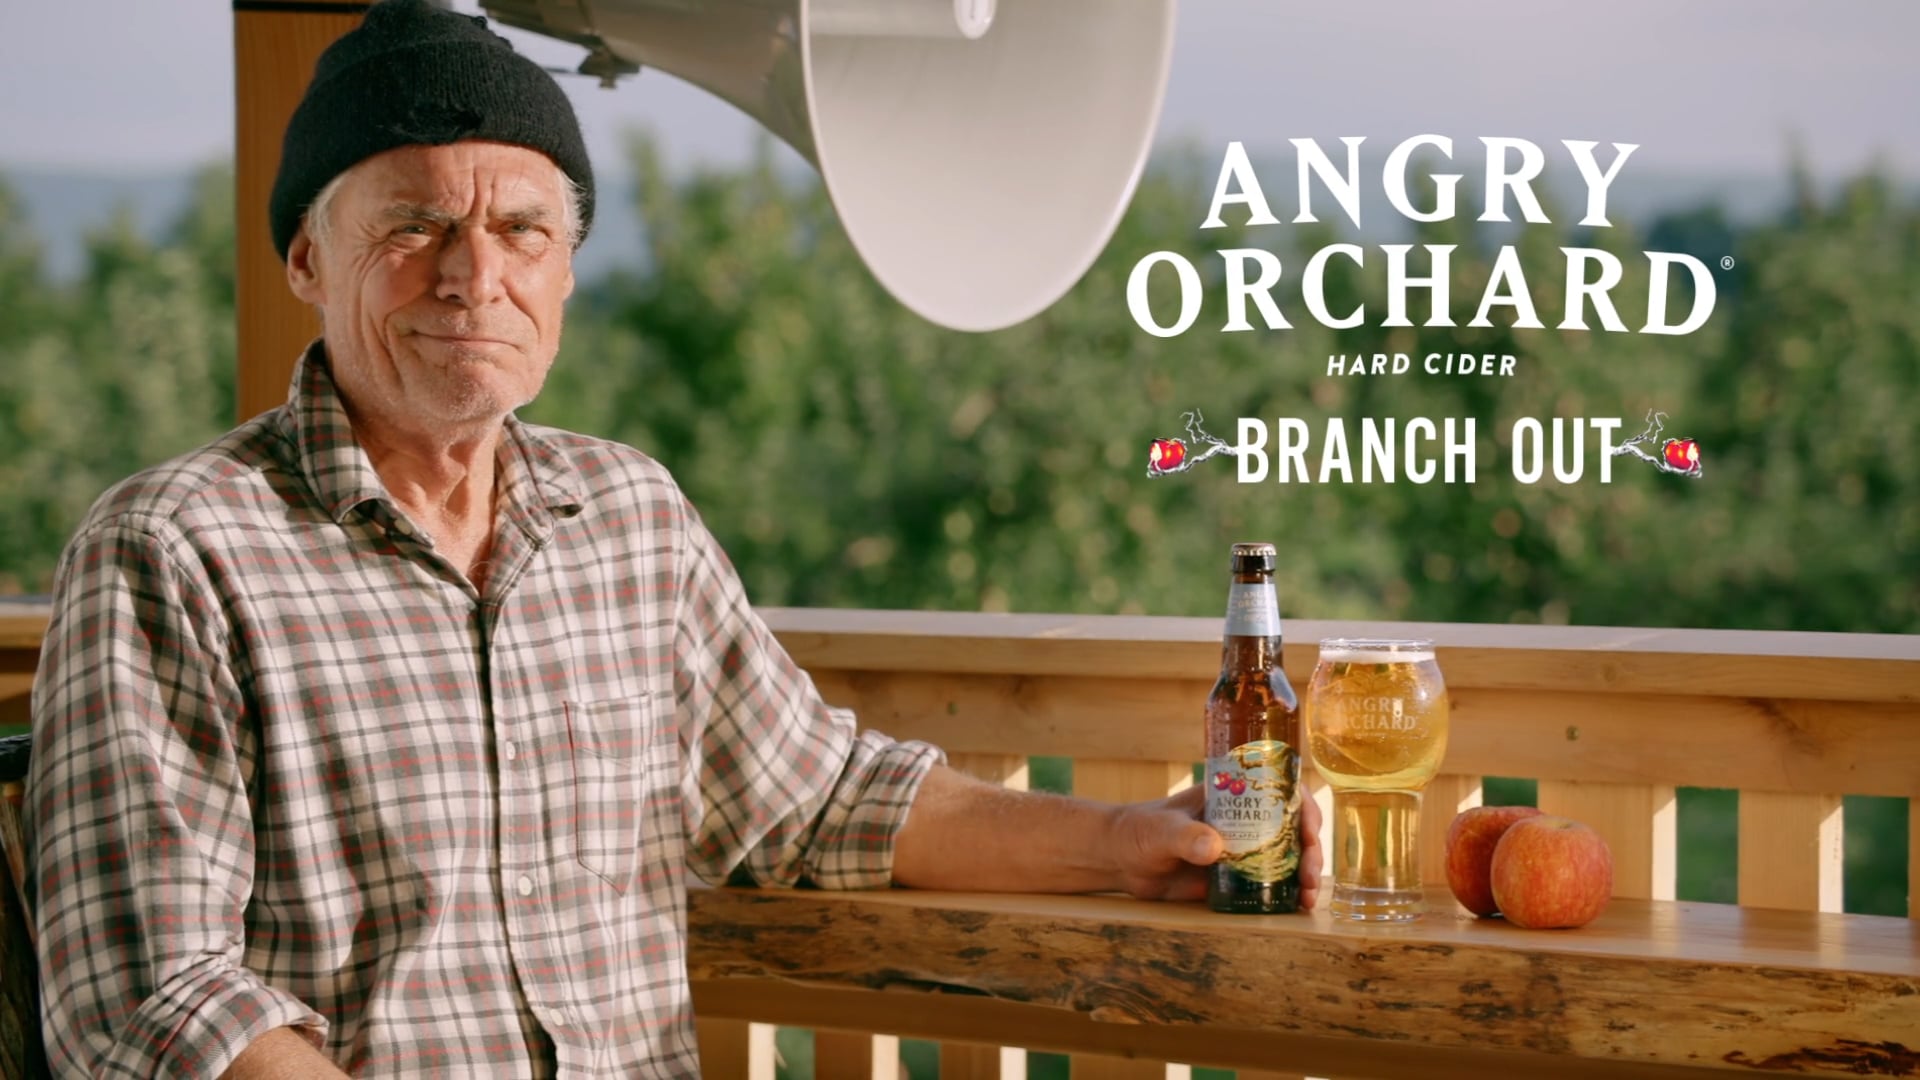 ANGRY ORCHARD || Branch Out || (Director's cut)